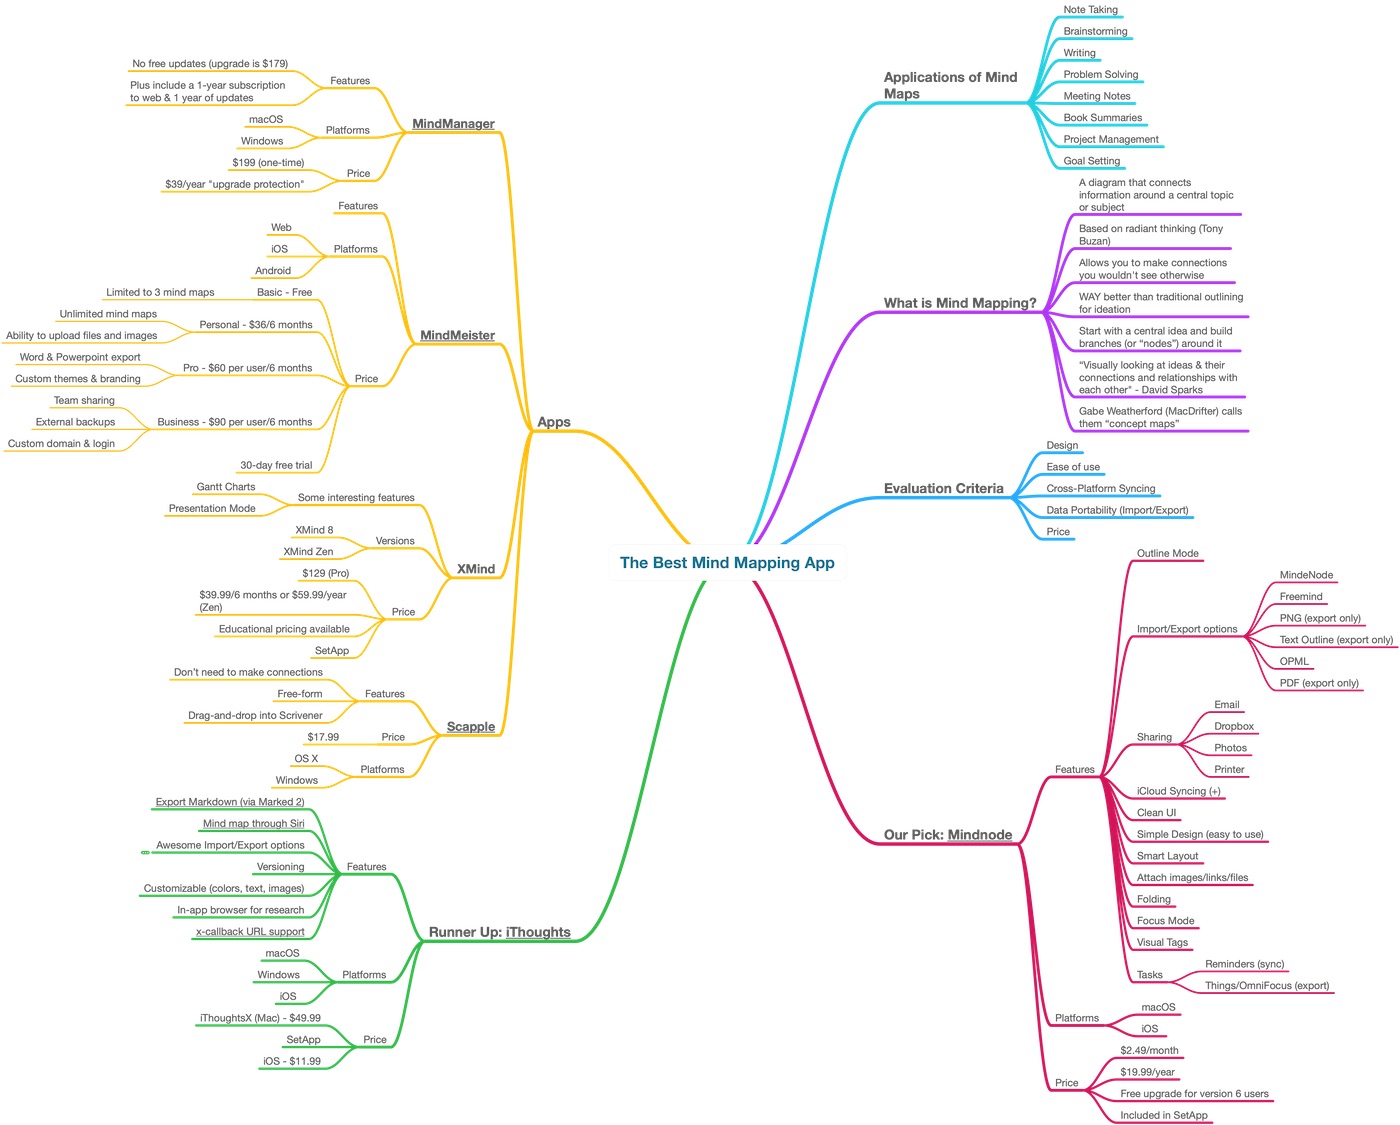 The actual mind map I used when writing the Best Mind Mapping App review for The Sweet Setup